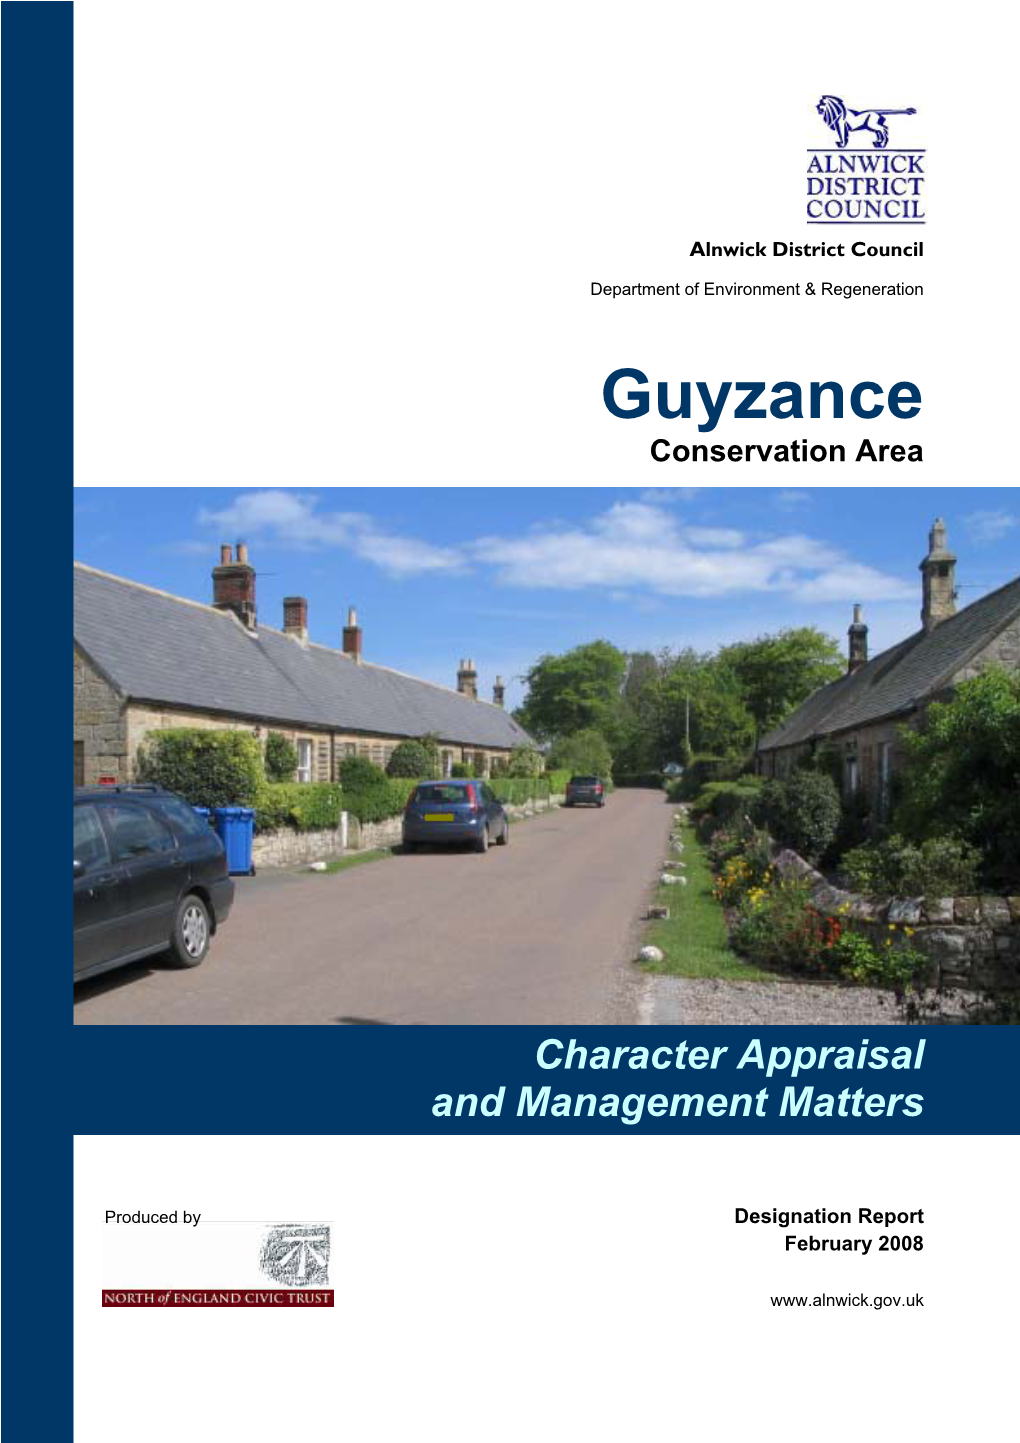 Guyzance Conservation Area Character